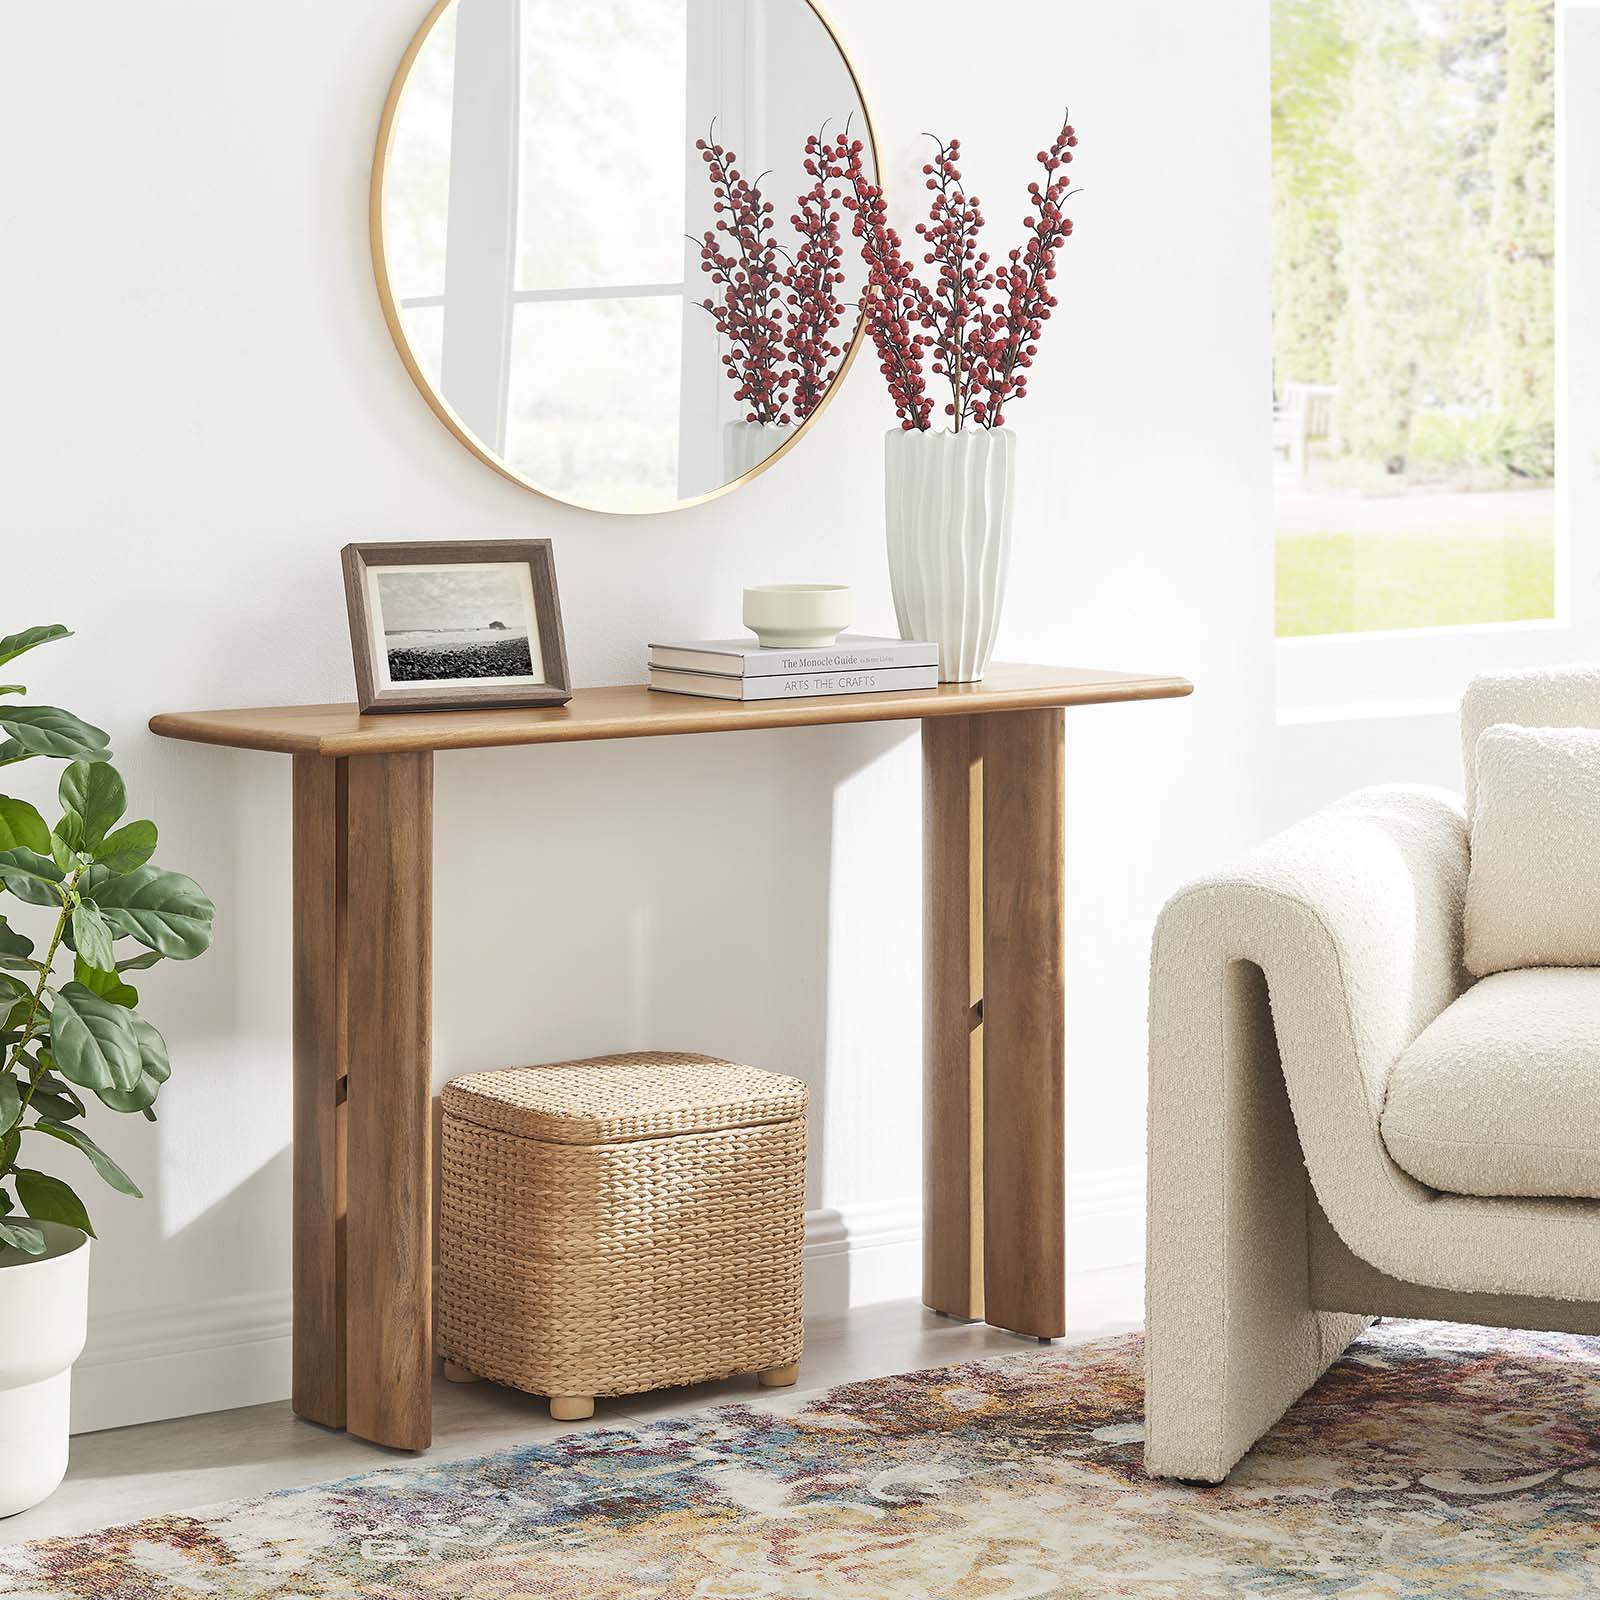 Amistad Wood Console Table - East Shore Modern Home Furnishings